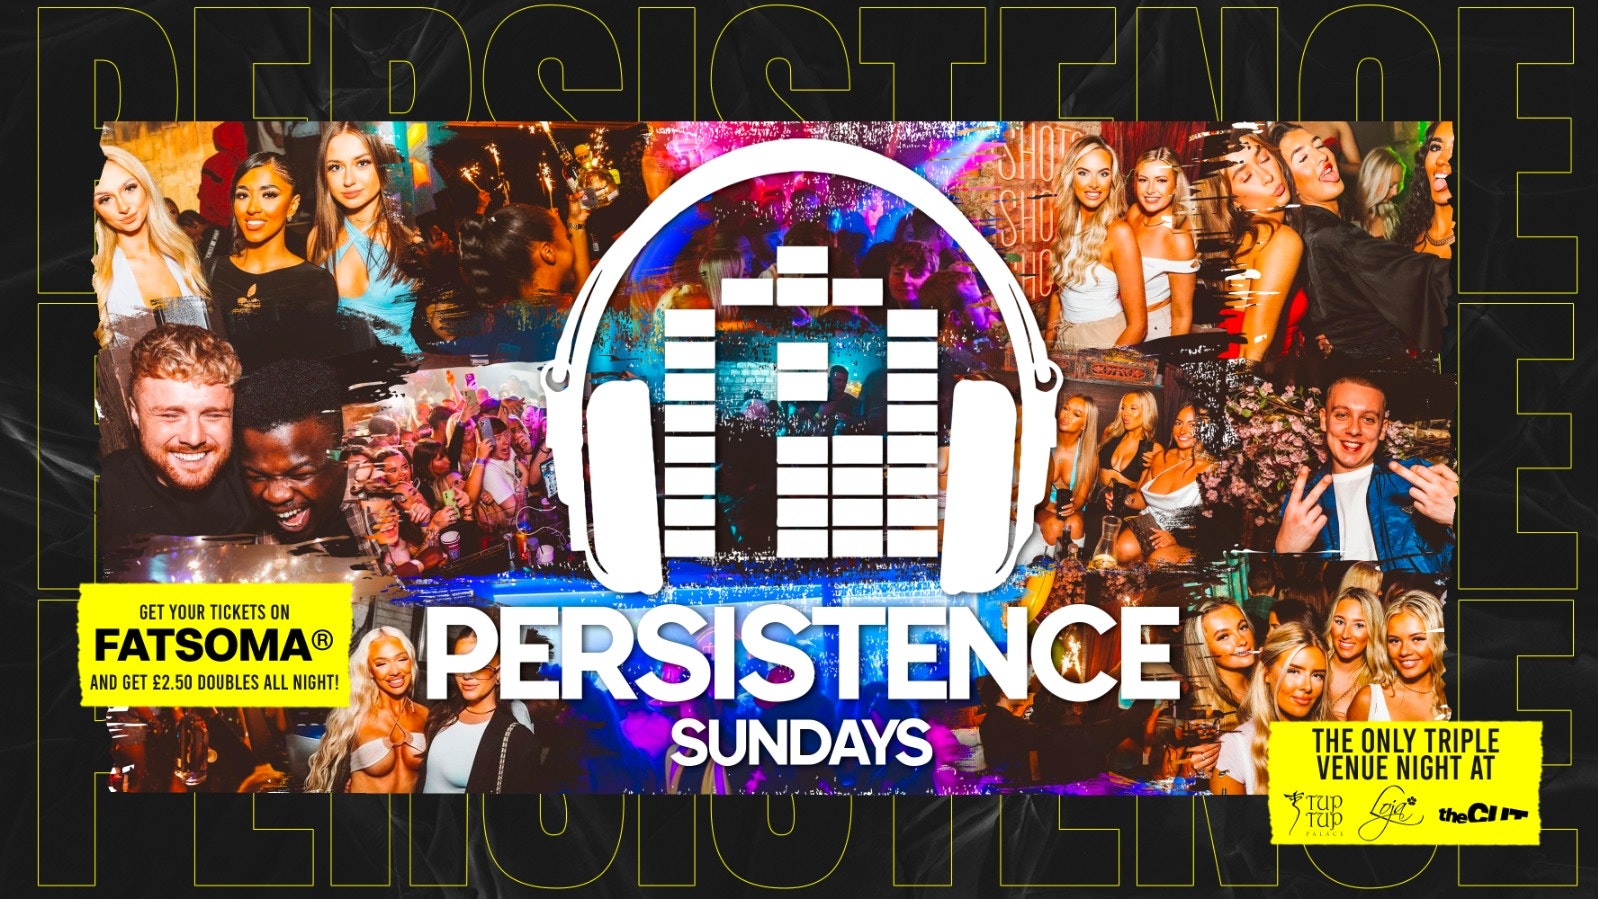 PERSISTENCE | £2.50 DOUBLES WITH A TICKET! | TUP TUP PALACE, LOJA & THE CUT | 5th FEBRUARY